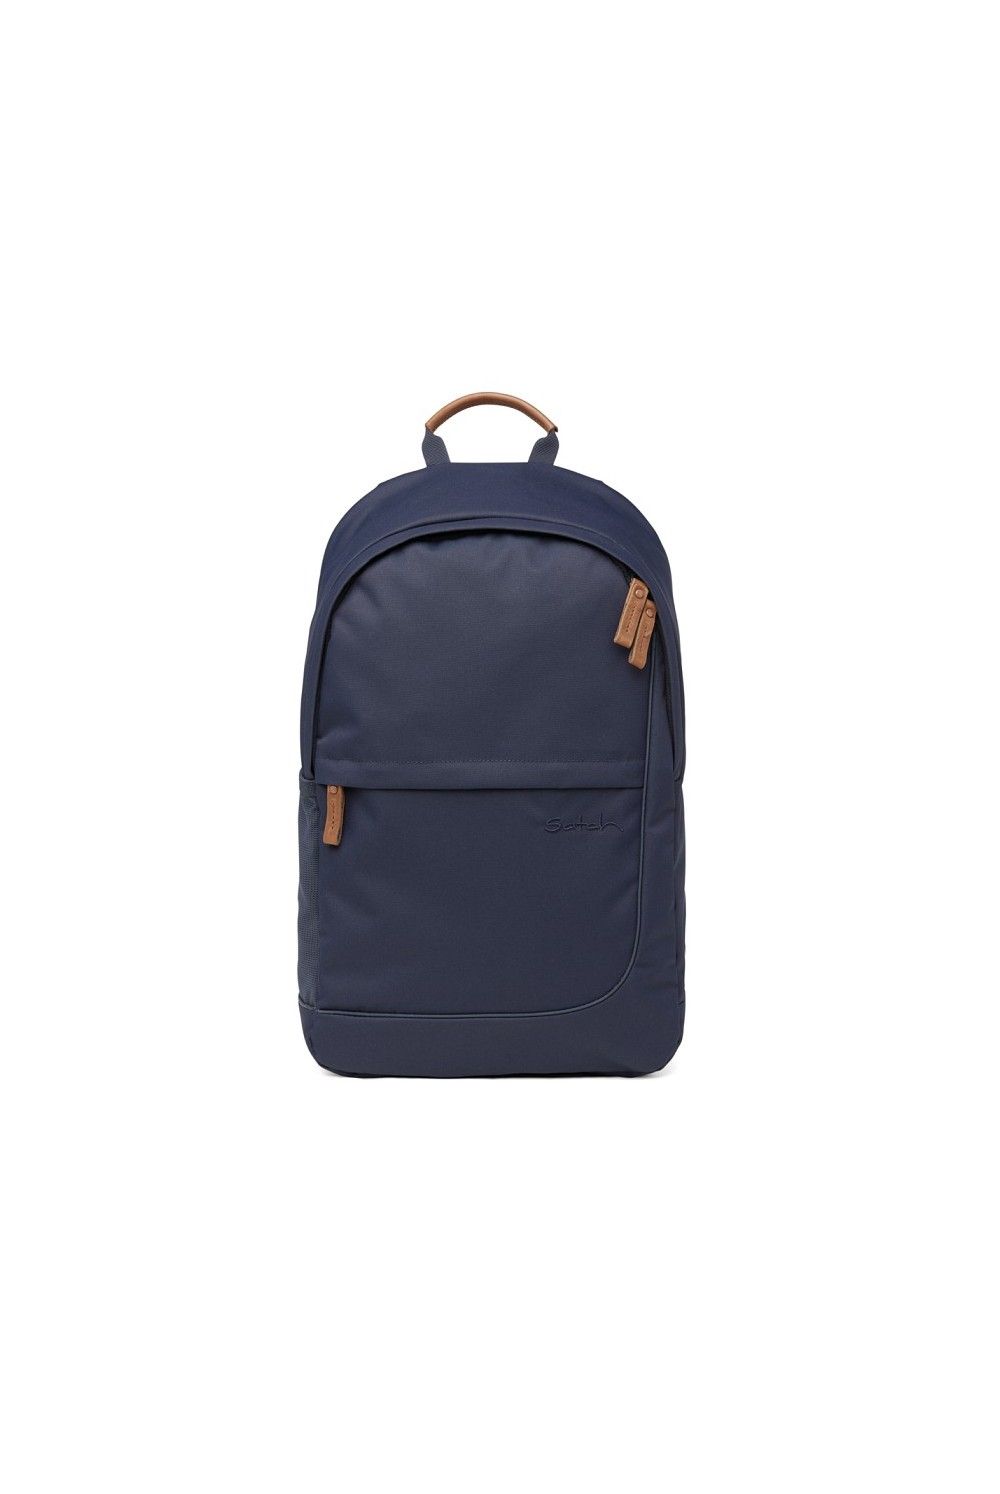 Sac à dos scolaire Satch Fly Nordic Blue